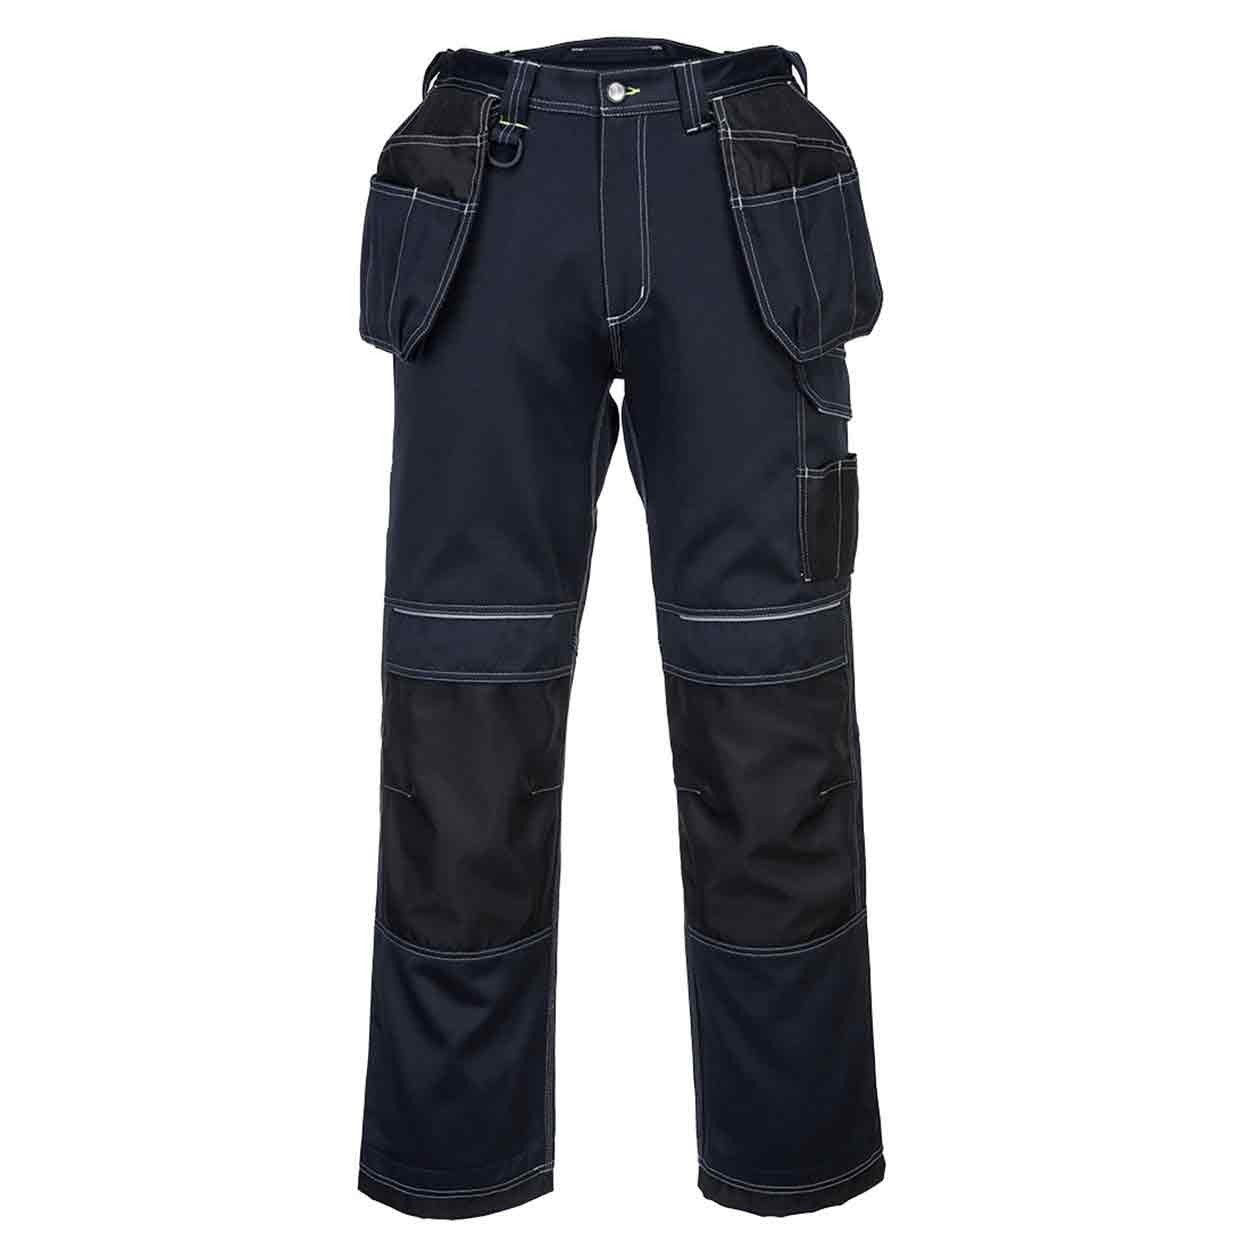 Top Rated Work Trousers What are the Best Work Trousers